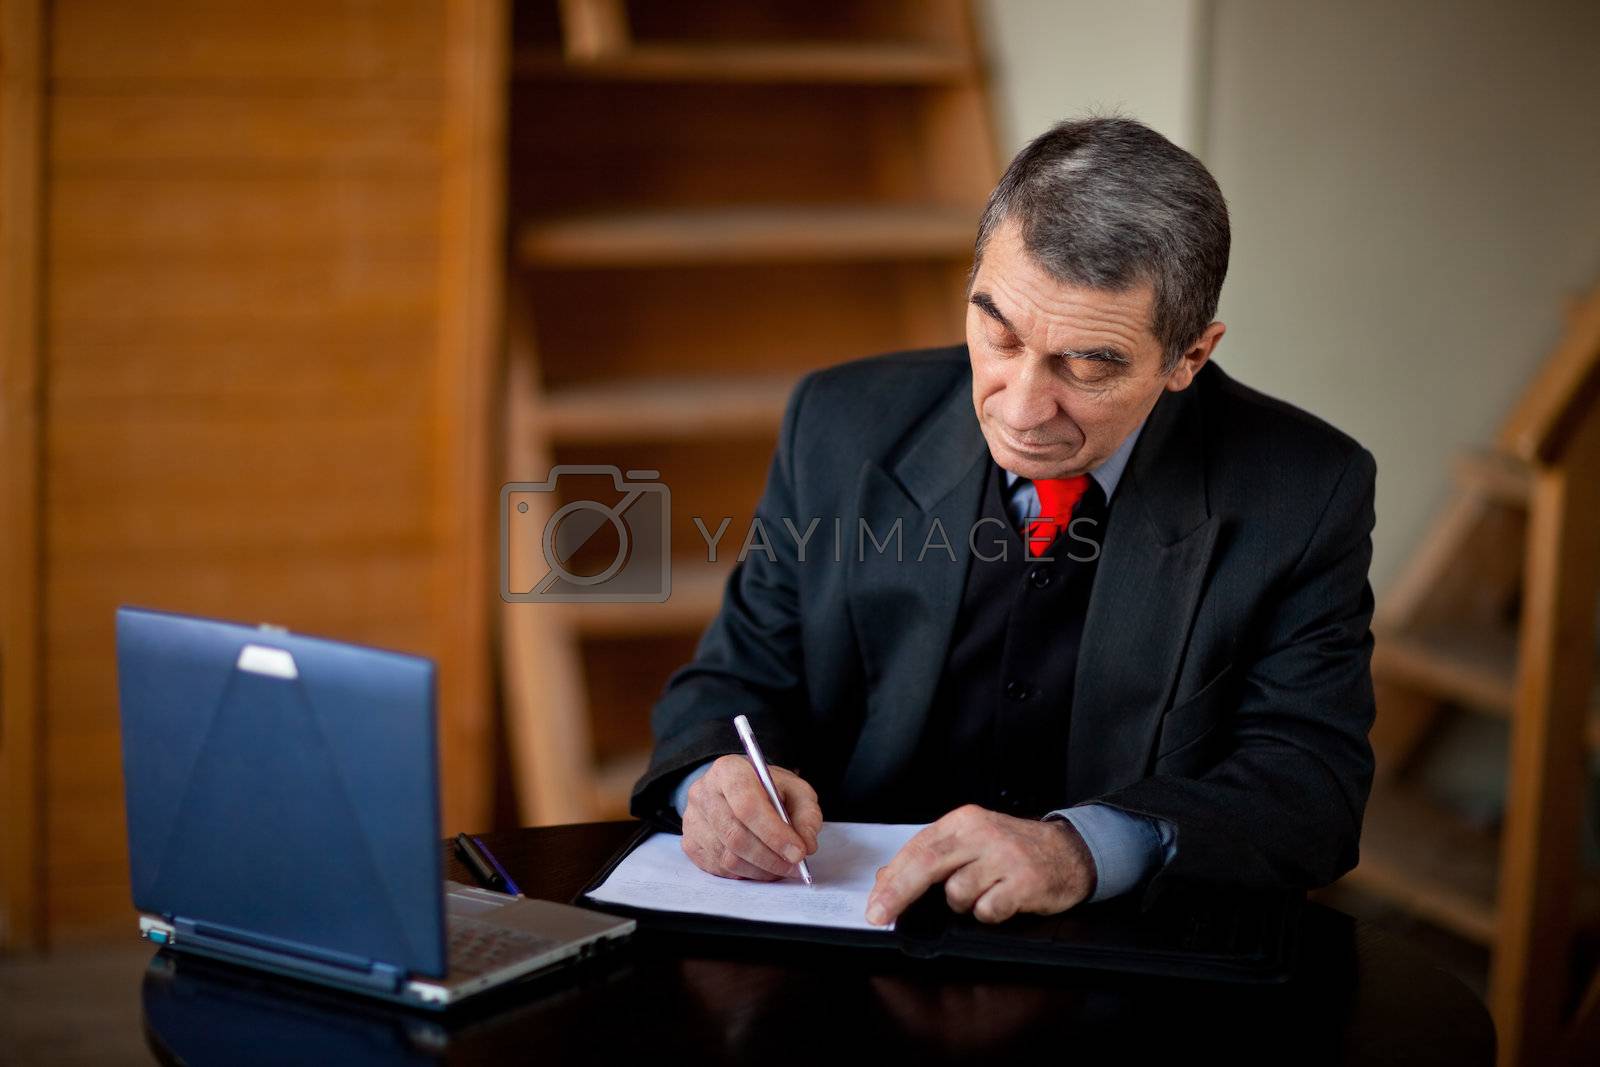 Royalty free image of Writing businessman by Gravicapa